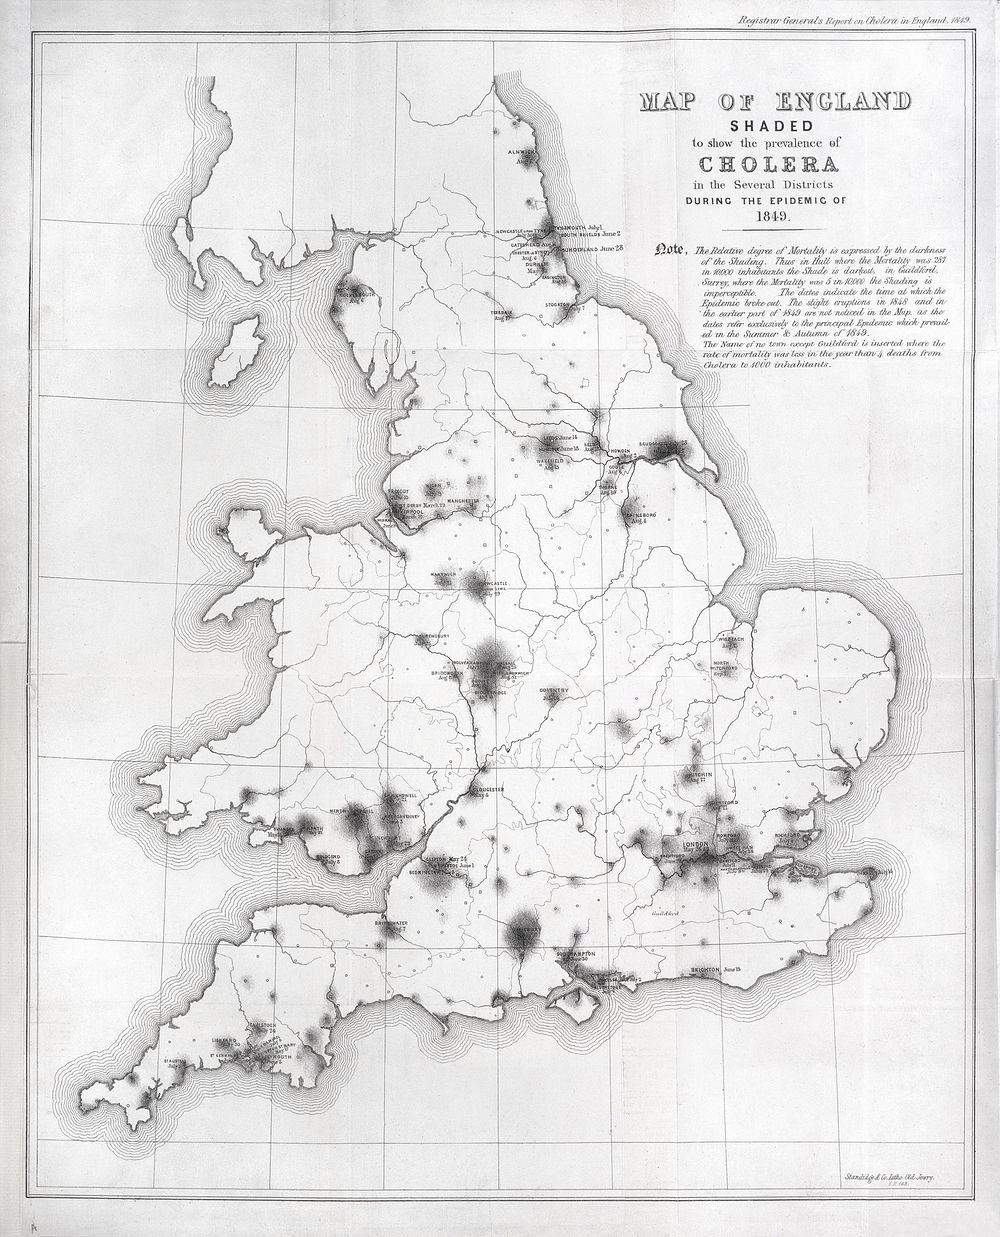 Report on the mortality of cholera in England, 1848-49.